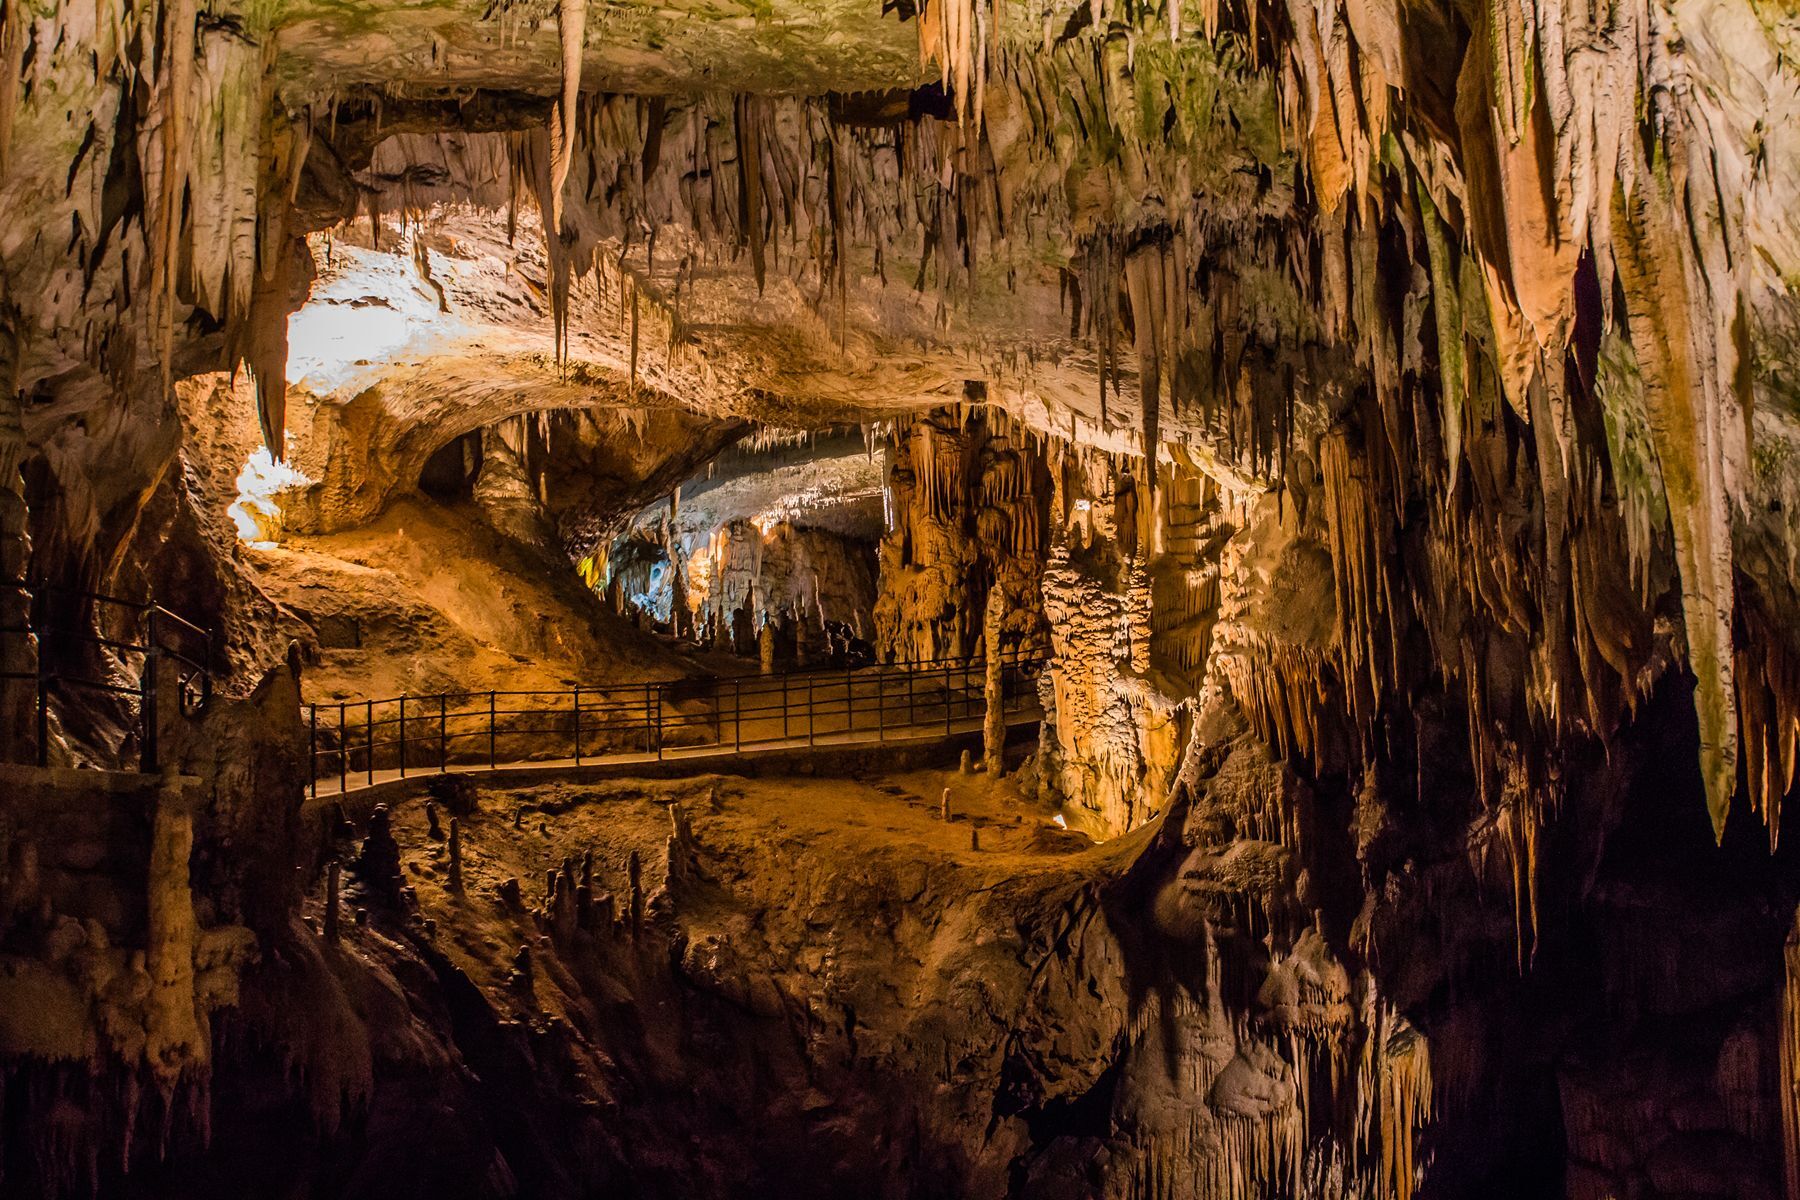 <p>One of the largest karst caves in the world, <a href="https://www.postojnska-jama.eu/en/postojna-cave/">Postojna Cave</a> is among Slovenia’s must-see natural treasures. To see its thousand-year-old stalactites, you’ll start with a guided electric train tour through hidden tunnels for an extra dose of adventure and wonder. The cave is also home to fascinating fauna like the olm, a rare aquatic salamander often likened to a baby dragon.</p>